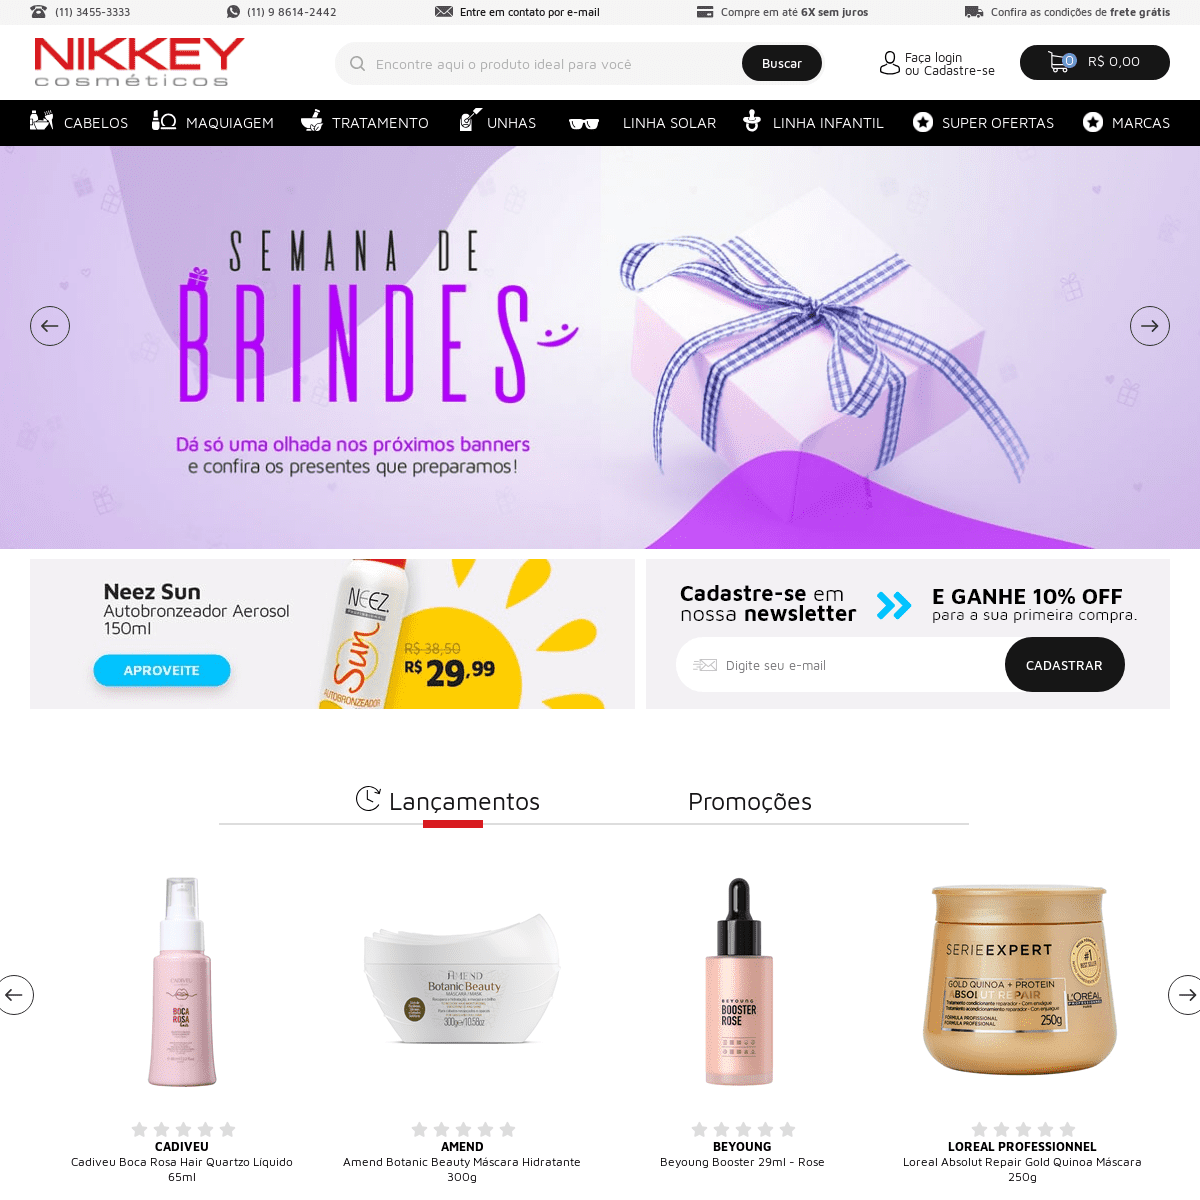 A complete backup of nikkeycosmeticos.com.br